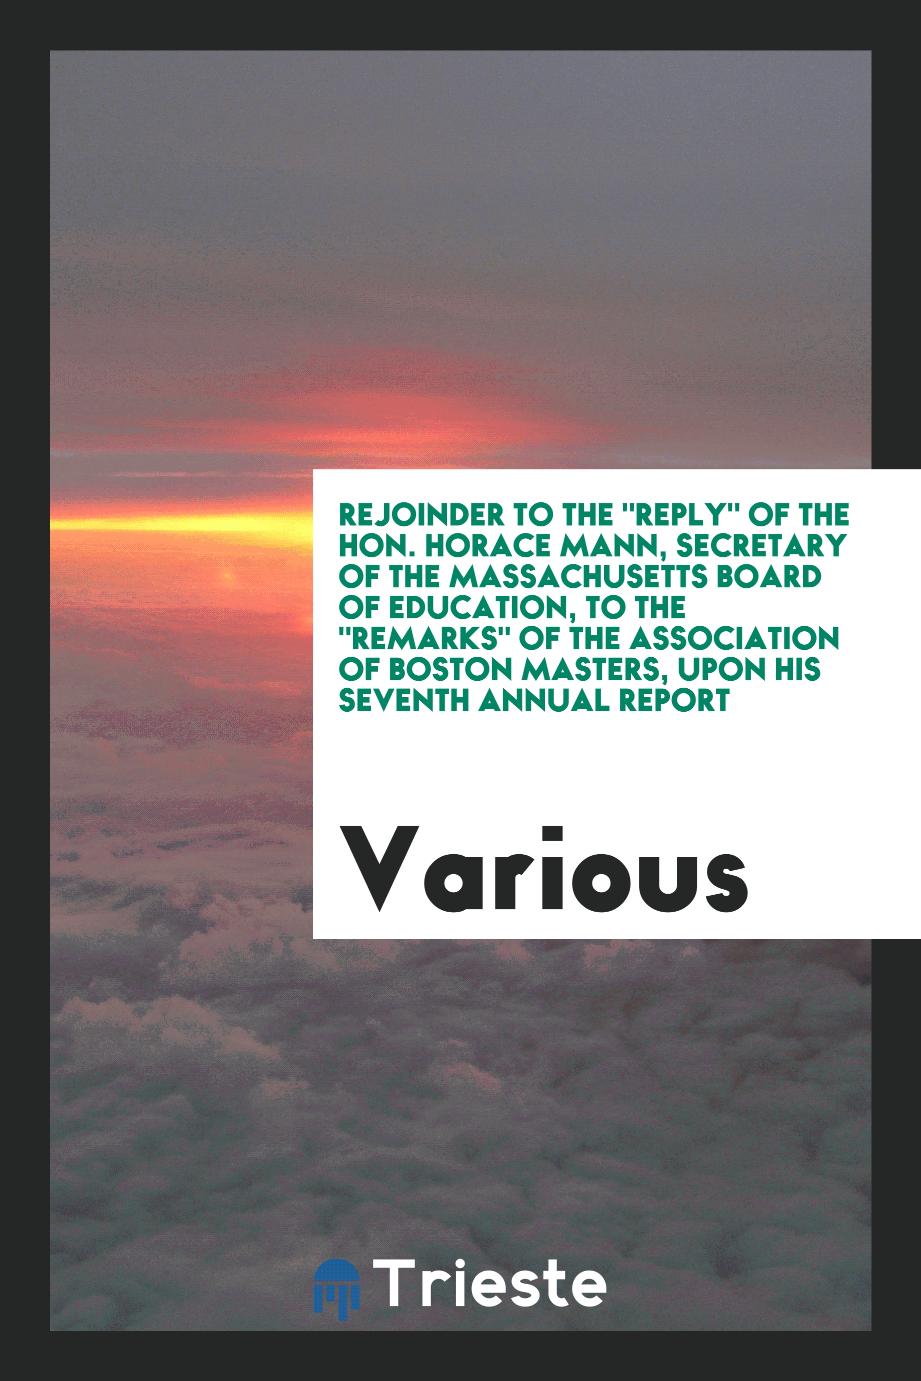 Rejoinder to the "Reply" of the Hon. Horace Mann, secretary of the Massachusetts Board of education, to the "Remarks" of the Association of Boston masters, upon his Seventh annual report